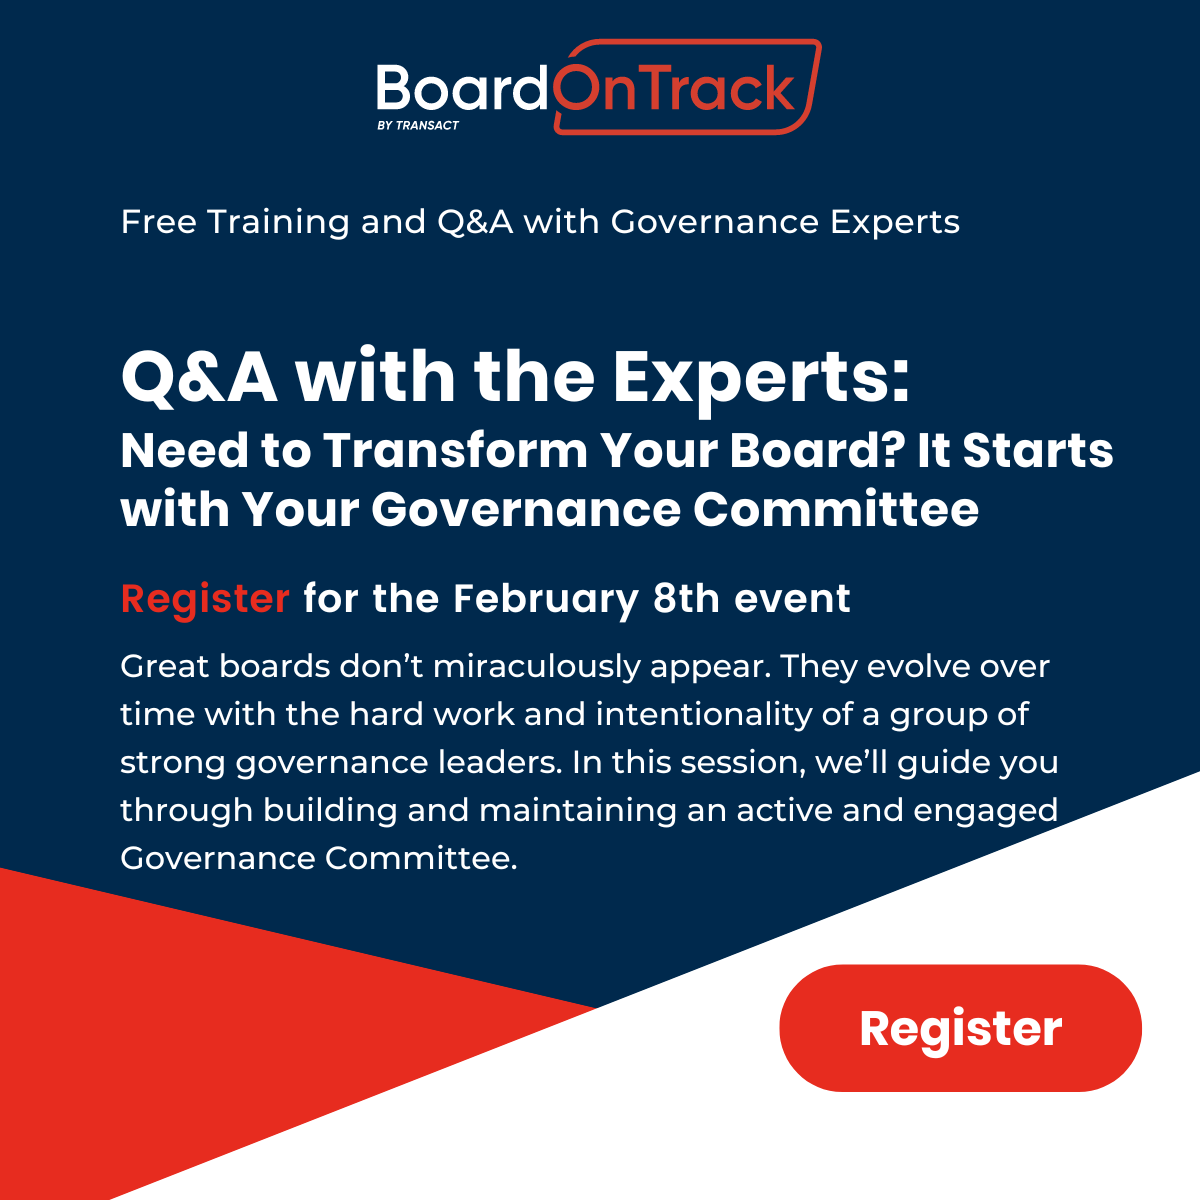 Need to Transform Your Board? It Starts with Your Governance Committee